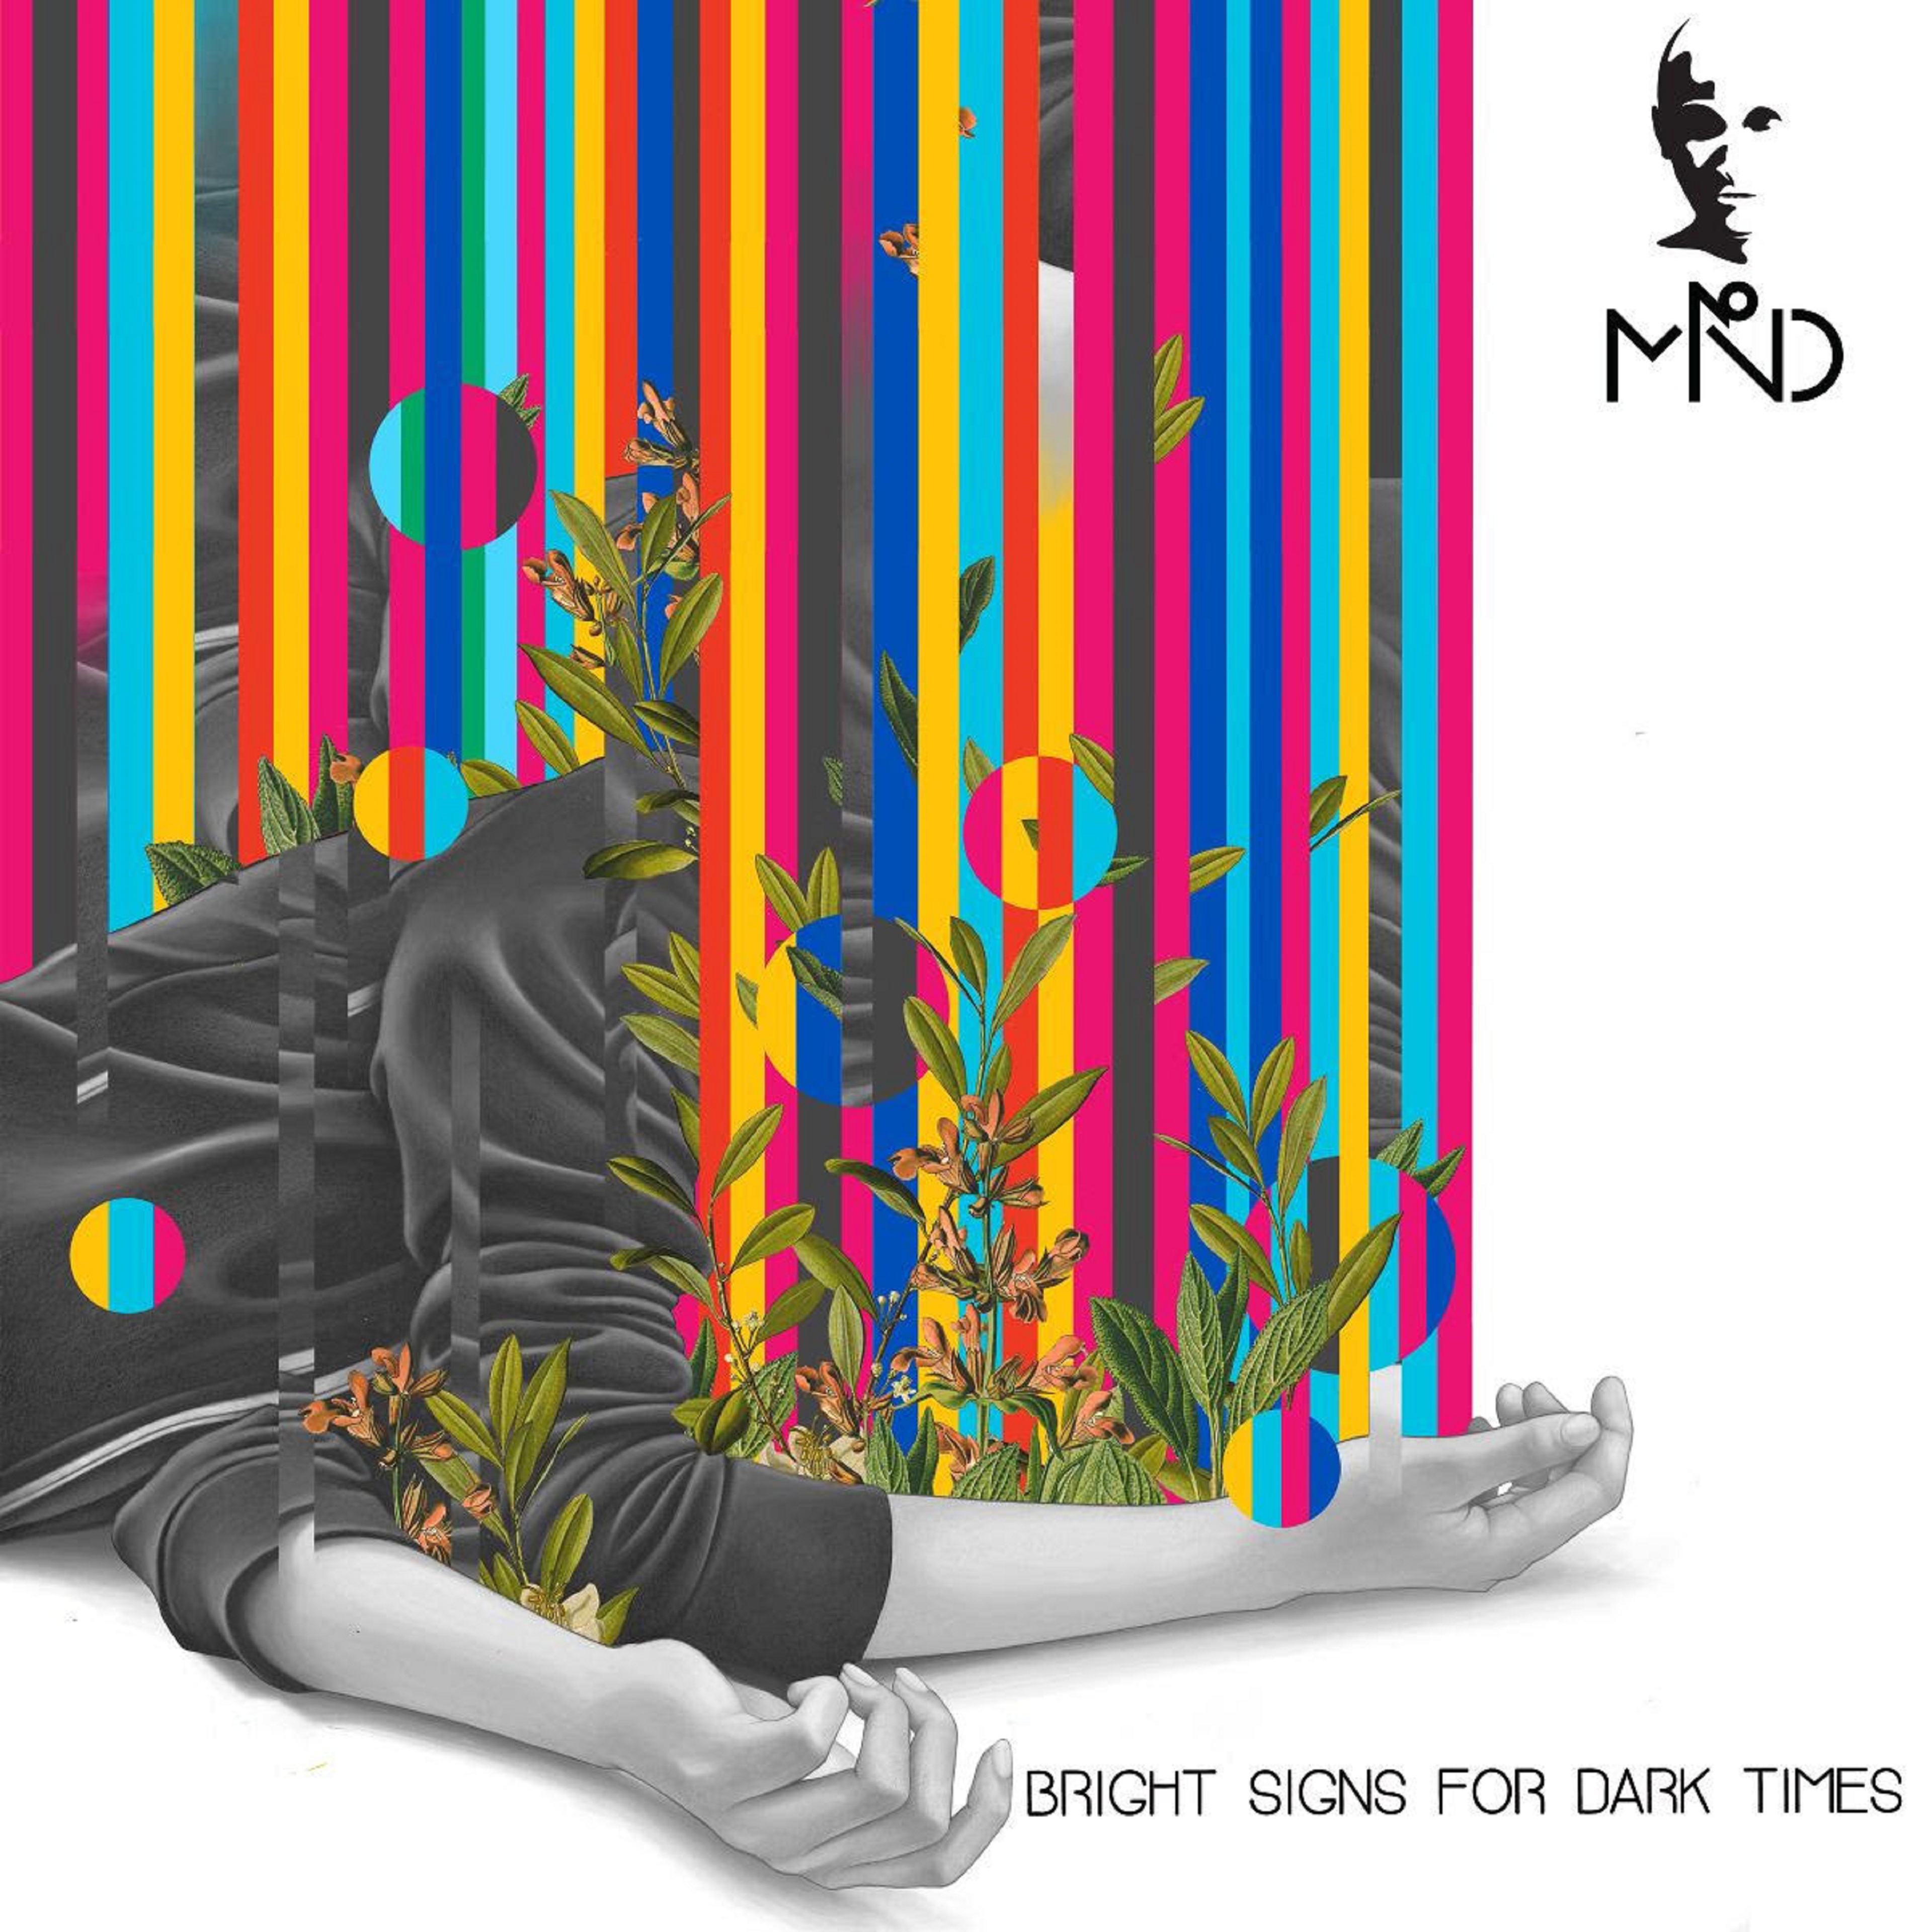 CT's No Mind Shares Debut Album, 'Bright Signs For Dark Times'